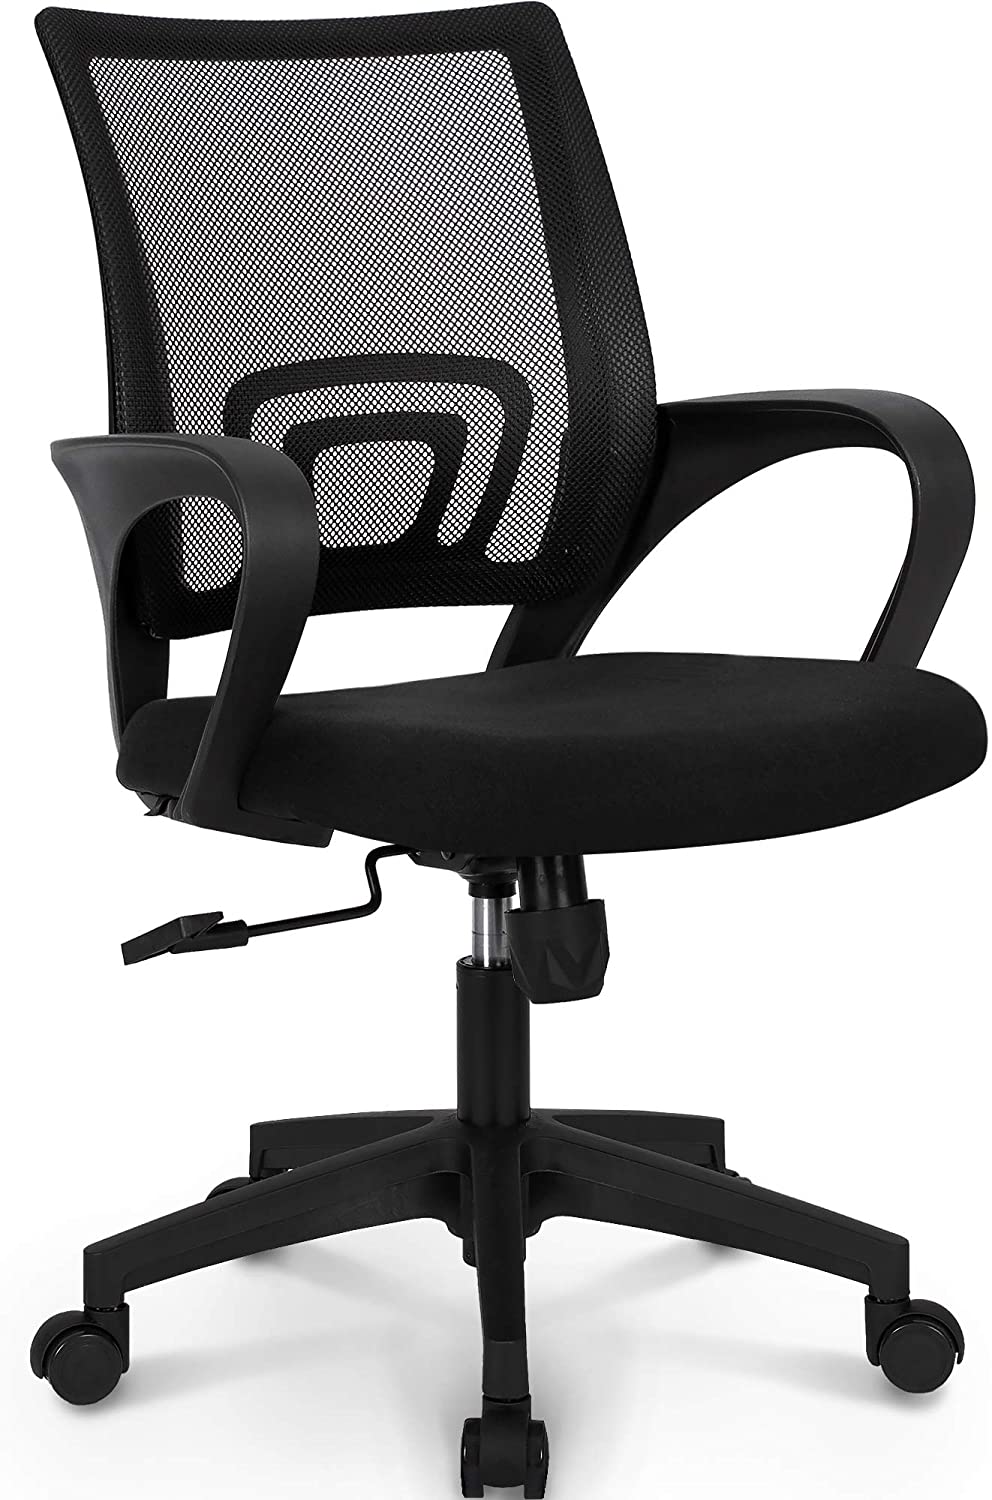 Ergonomic Mid Back Office Chair, Mesh Desk Computer Chair with